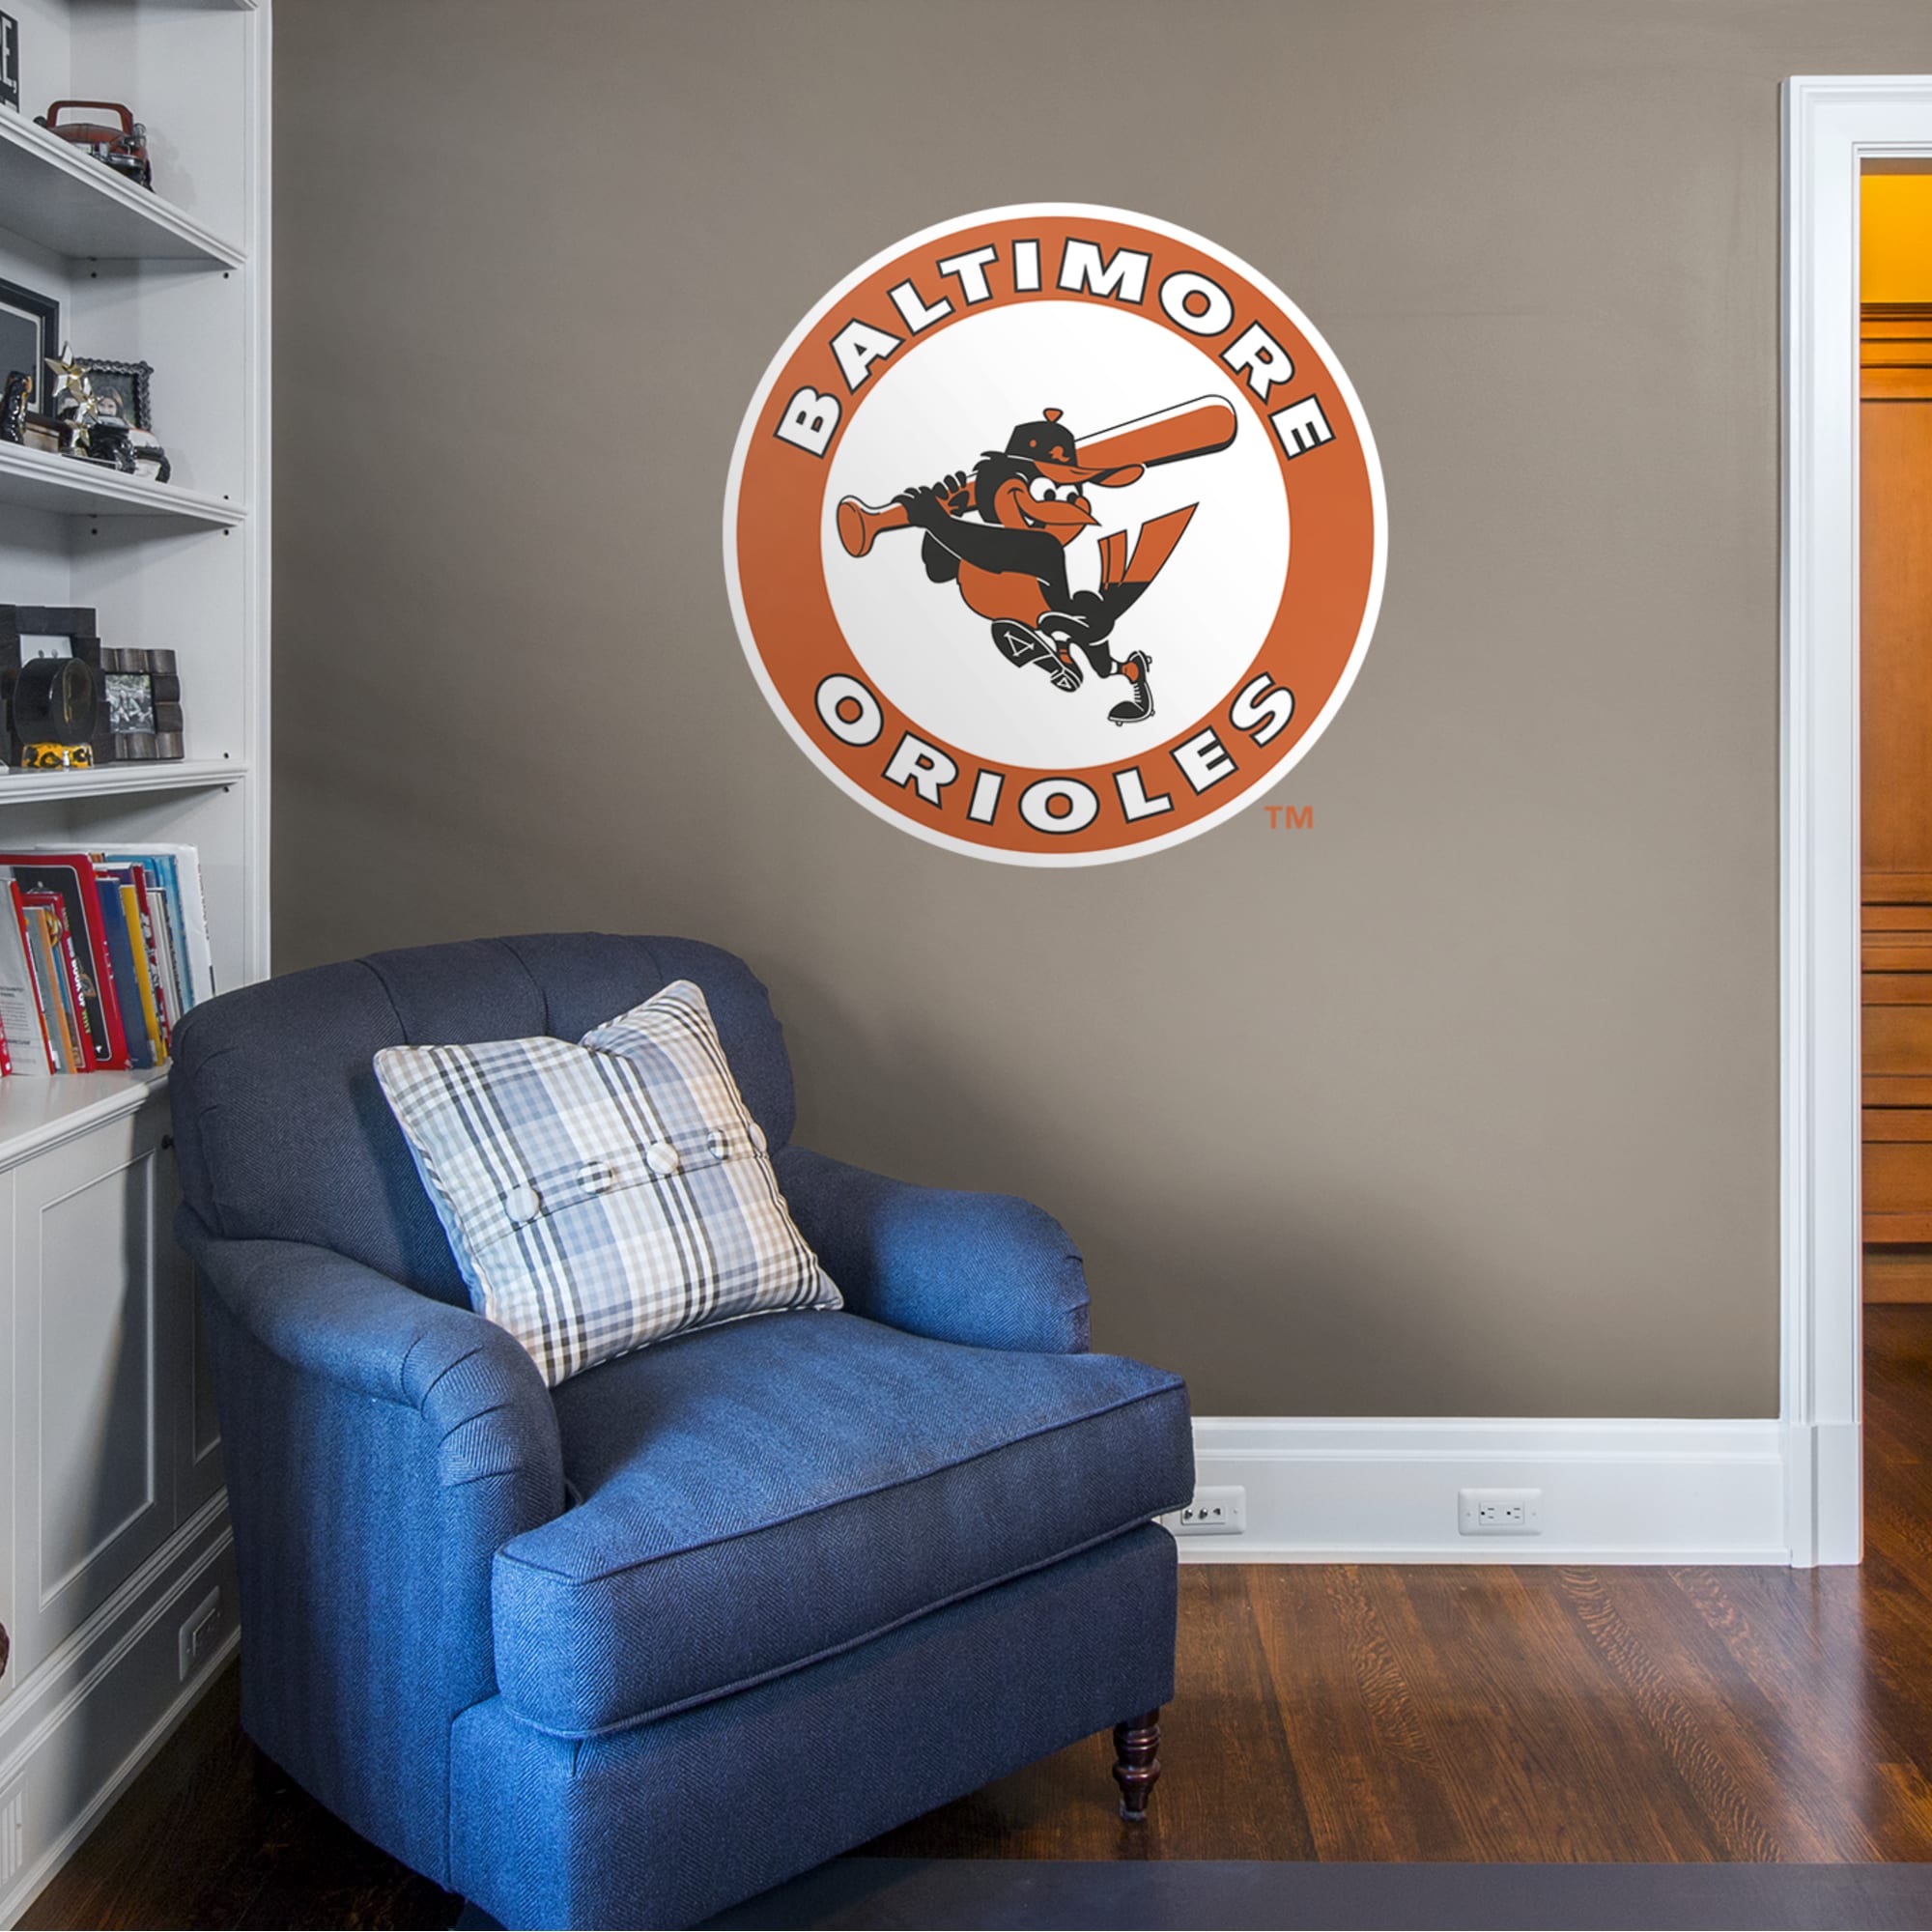 Baltimore Orioles: Classic Logo - Officially Licensed MLB Removable Wall Decal 39.0"W x 39.0"H by Fathead | Vinyl